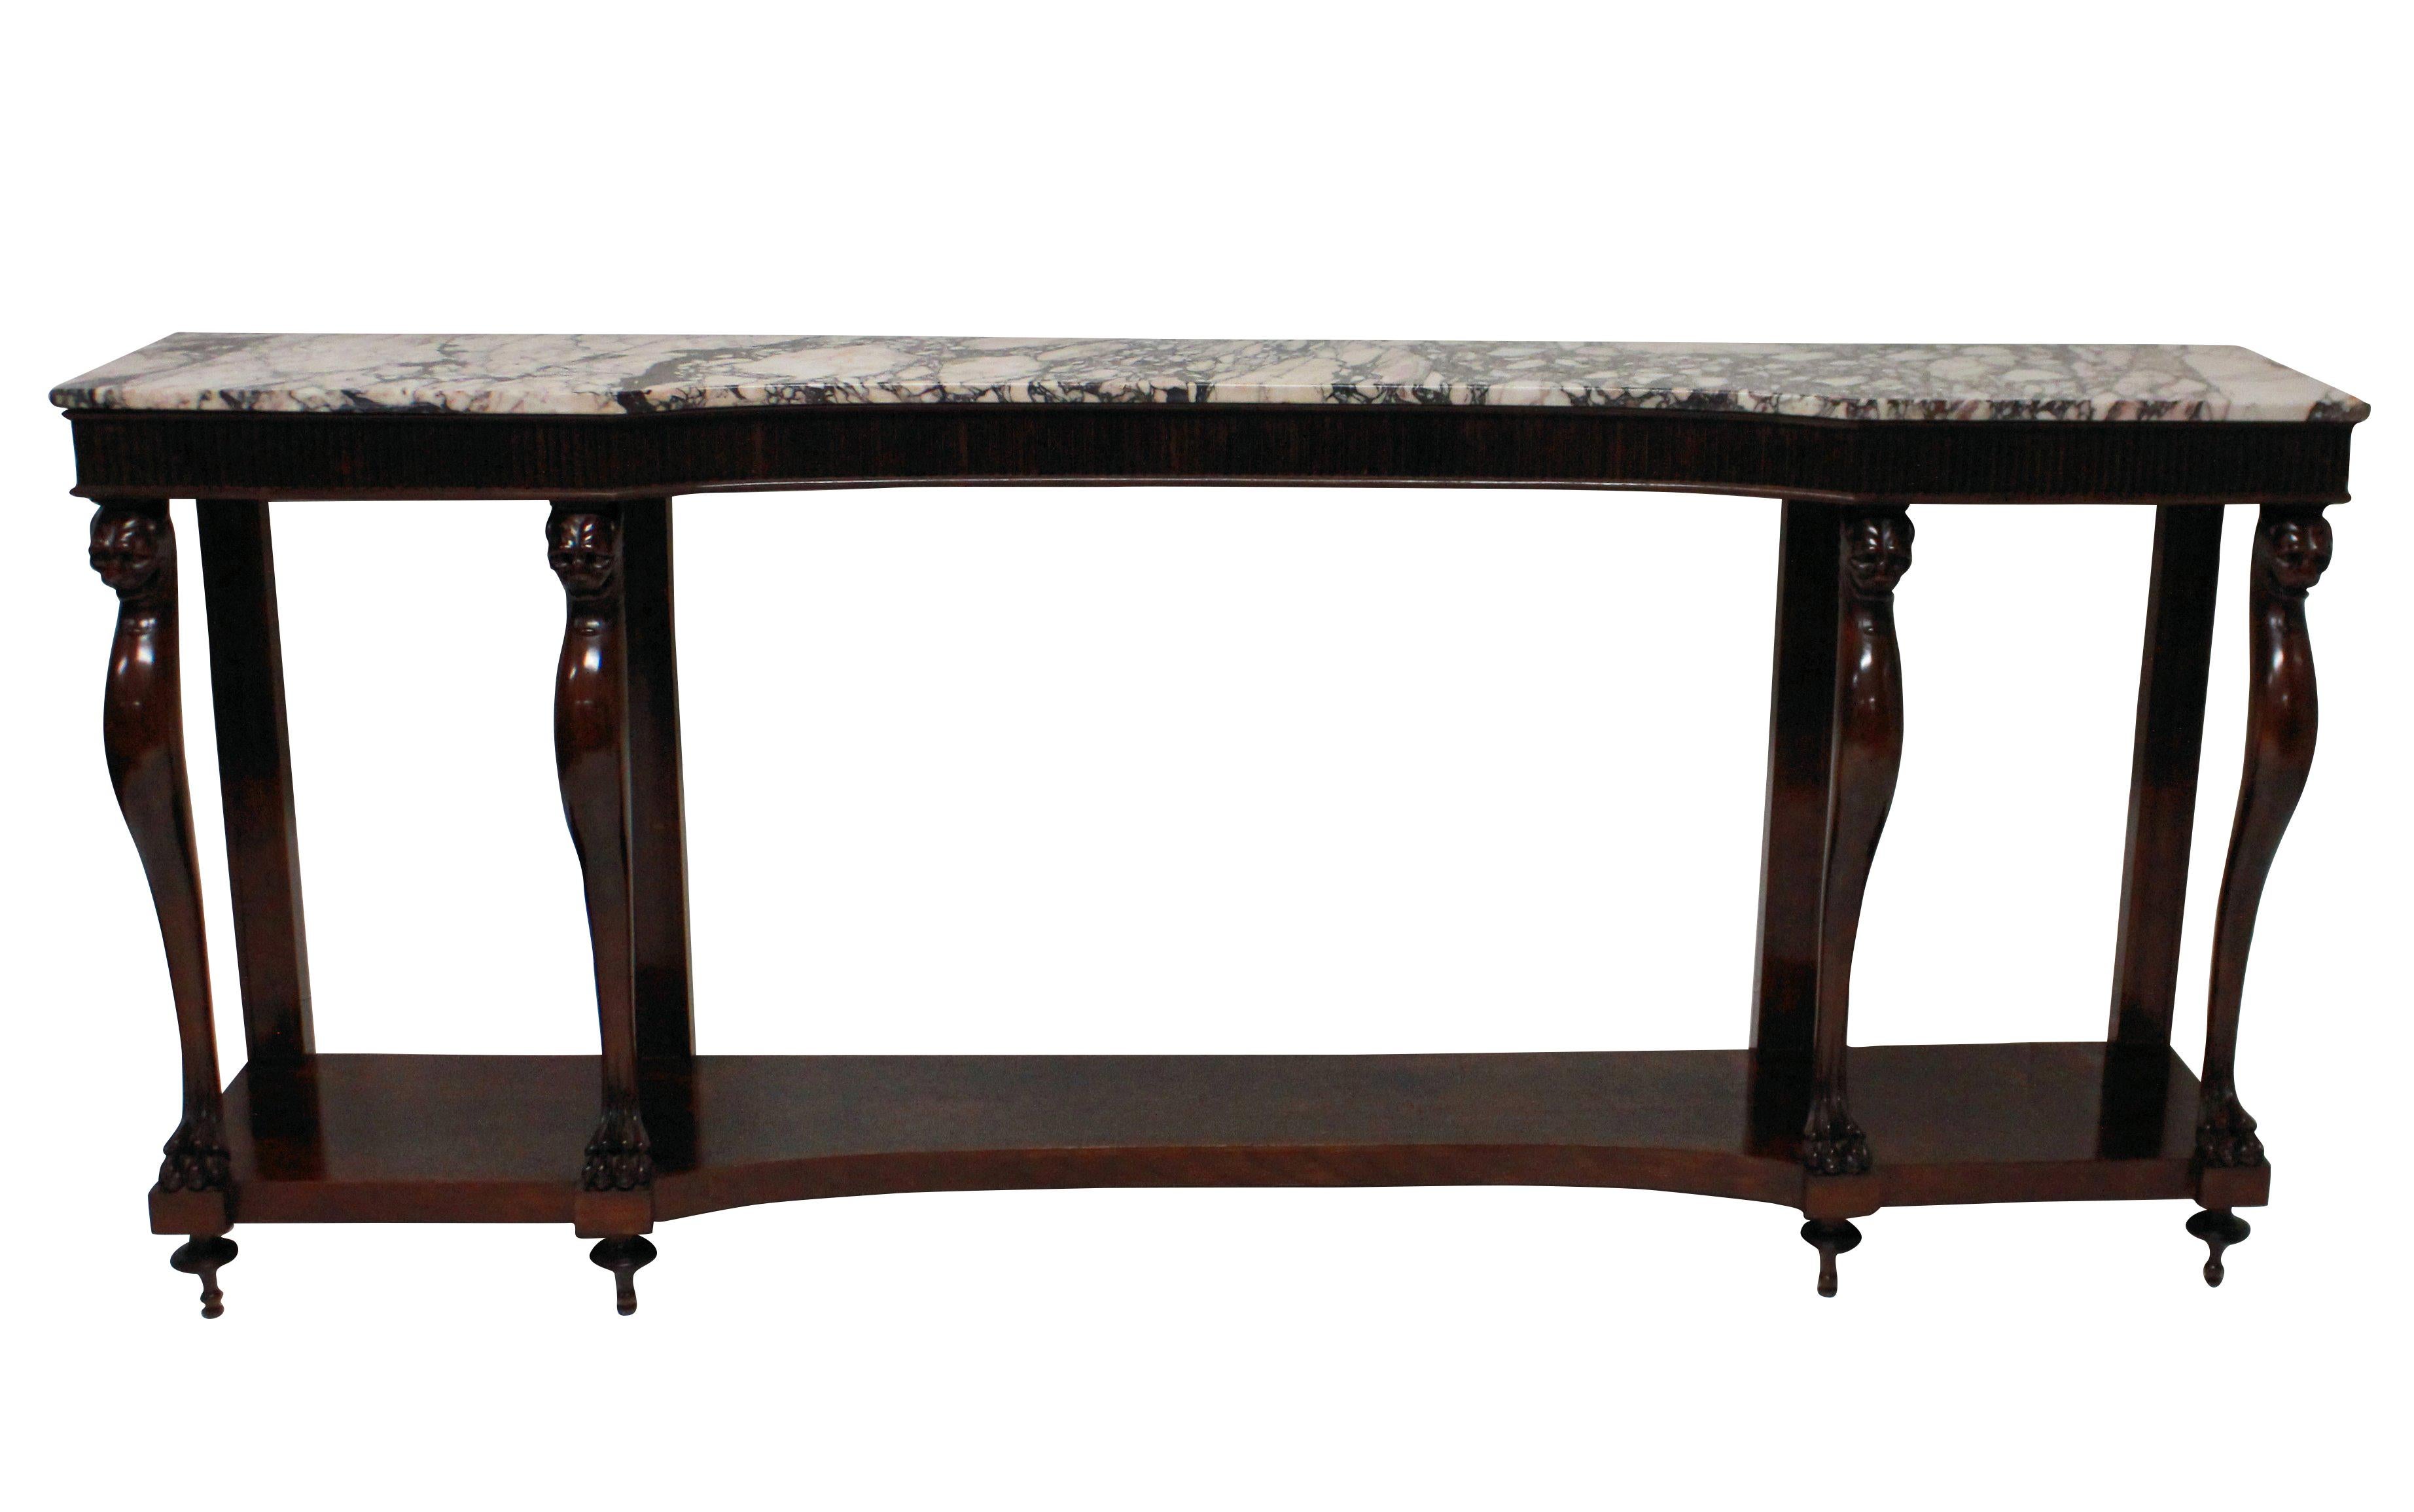 Monumental Italian Neoclassical Marble-Top Console Table 1